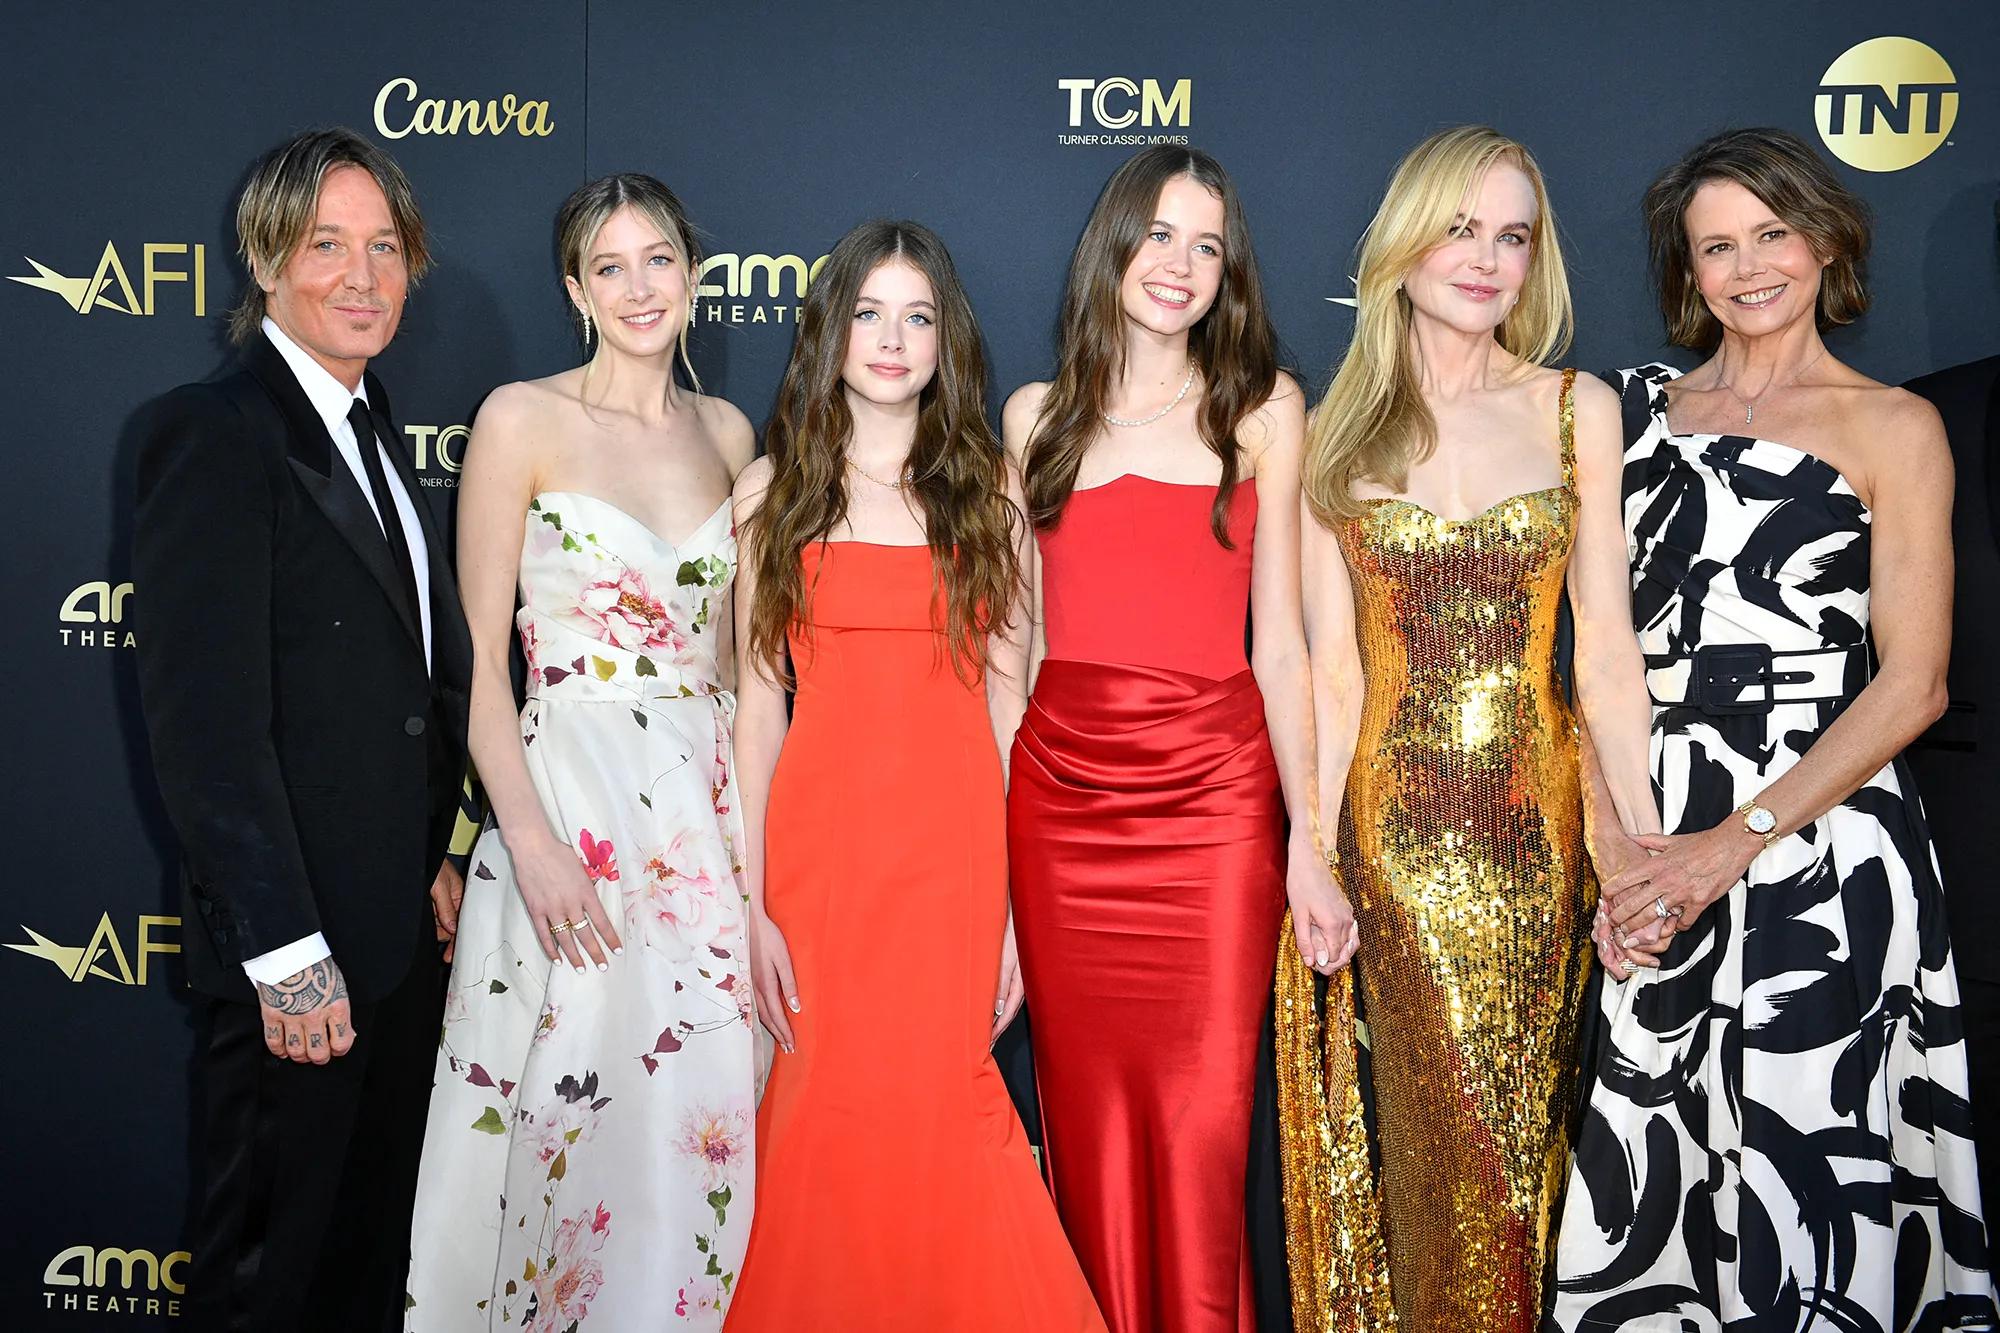 Nicole-Kidman-and-Keith-Urban-Daughters-Pose-With-Their-Parents-at-AFI-Life-Achievement-Award-Gala-01.webp.jpg